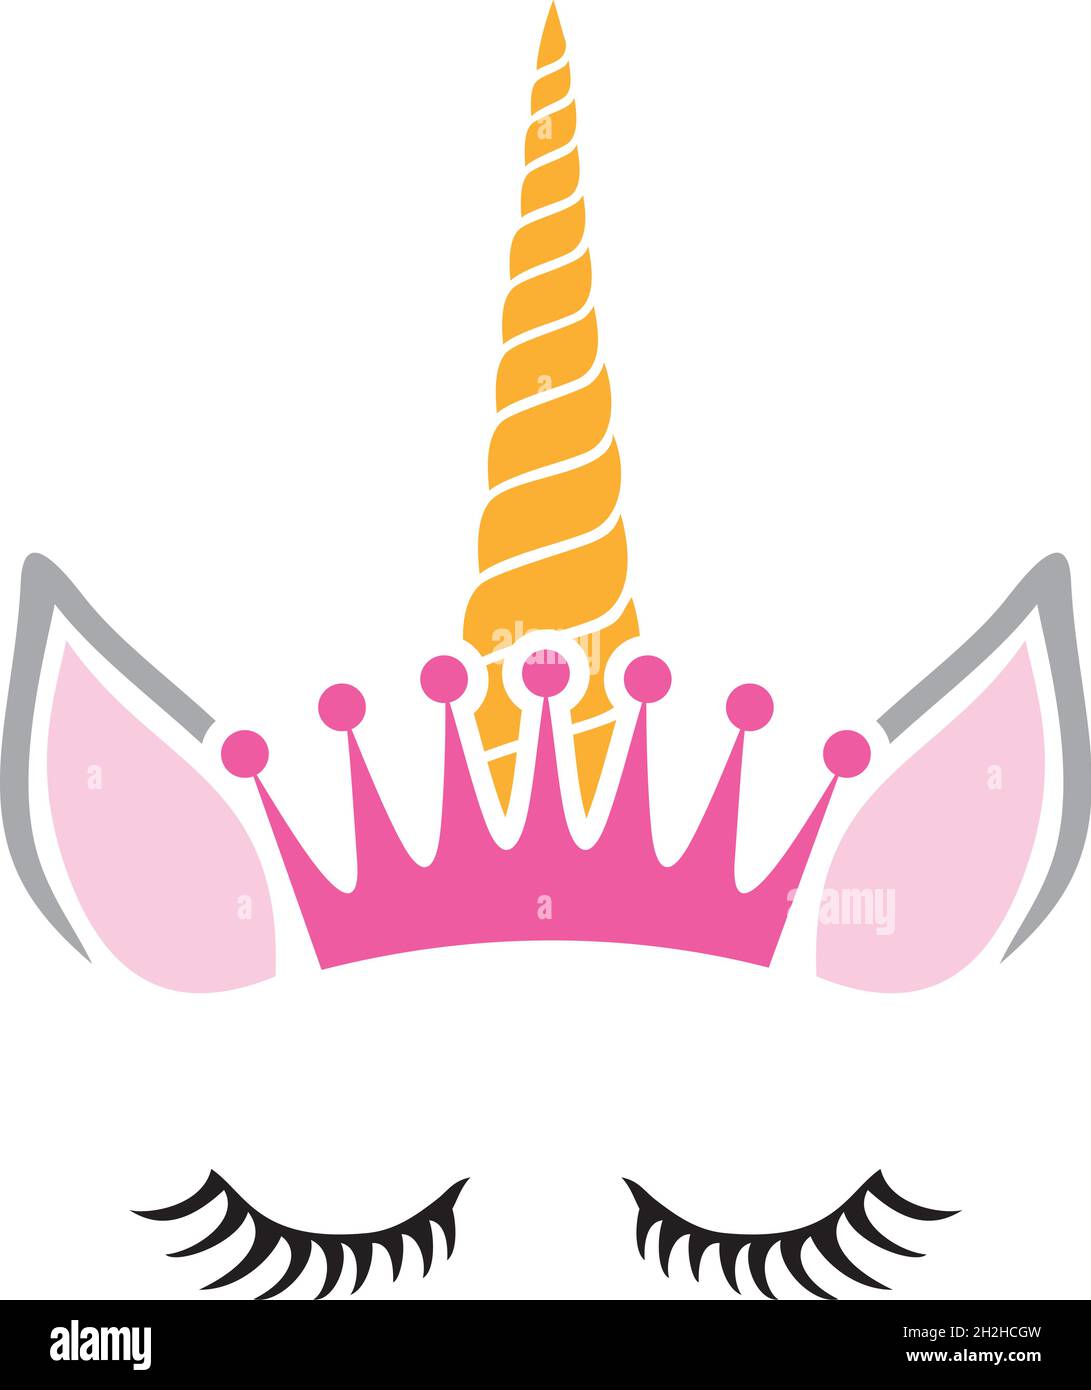 Unicorn princess with crown vector illustration Stock Vector